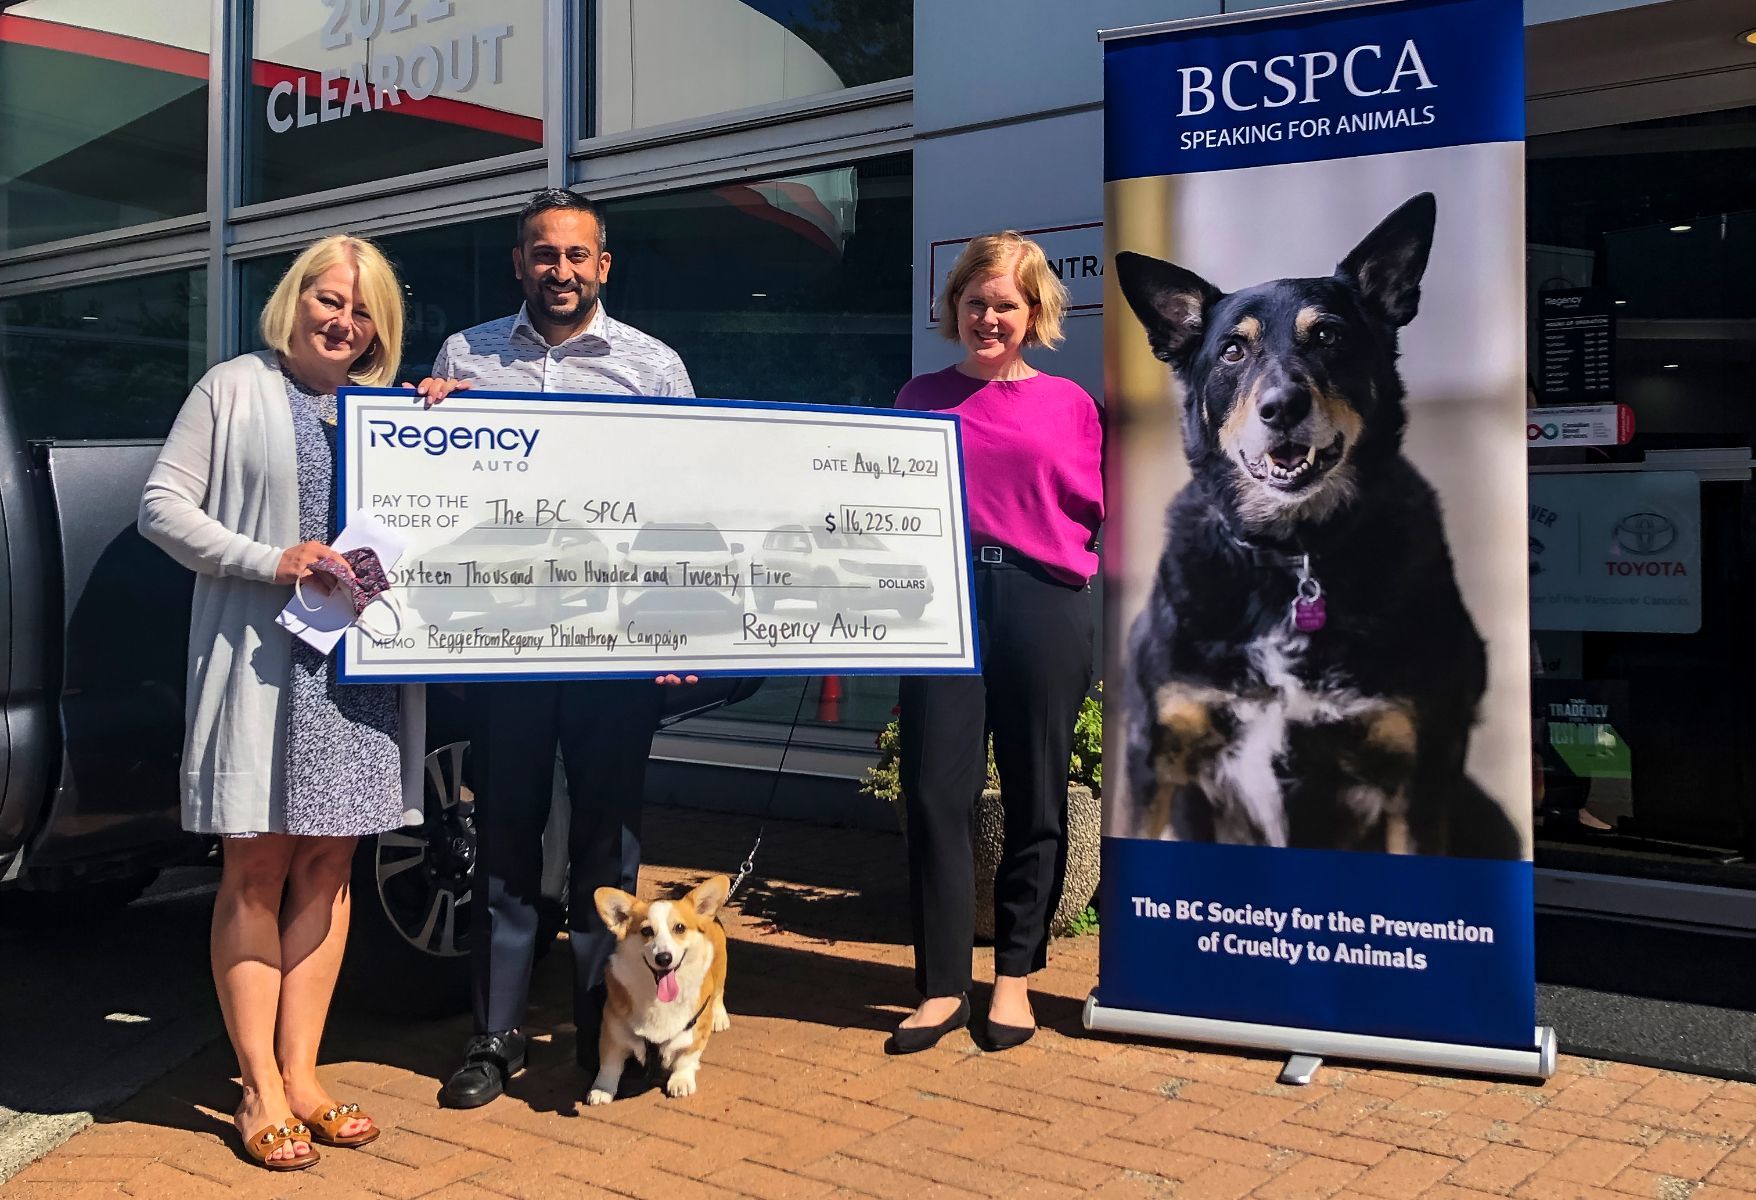 We raised $17,000+ for the British Columbia Society for the Prevention of Cruelty to Animals!